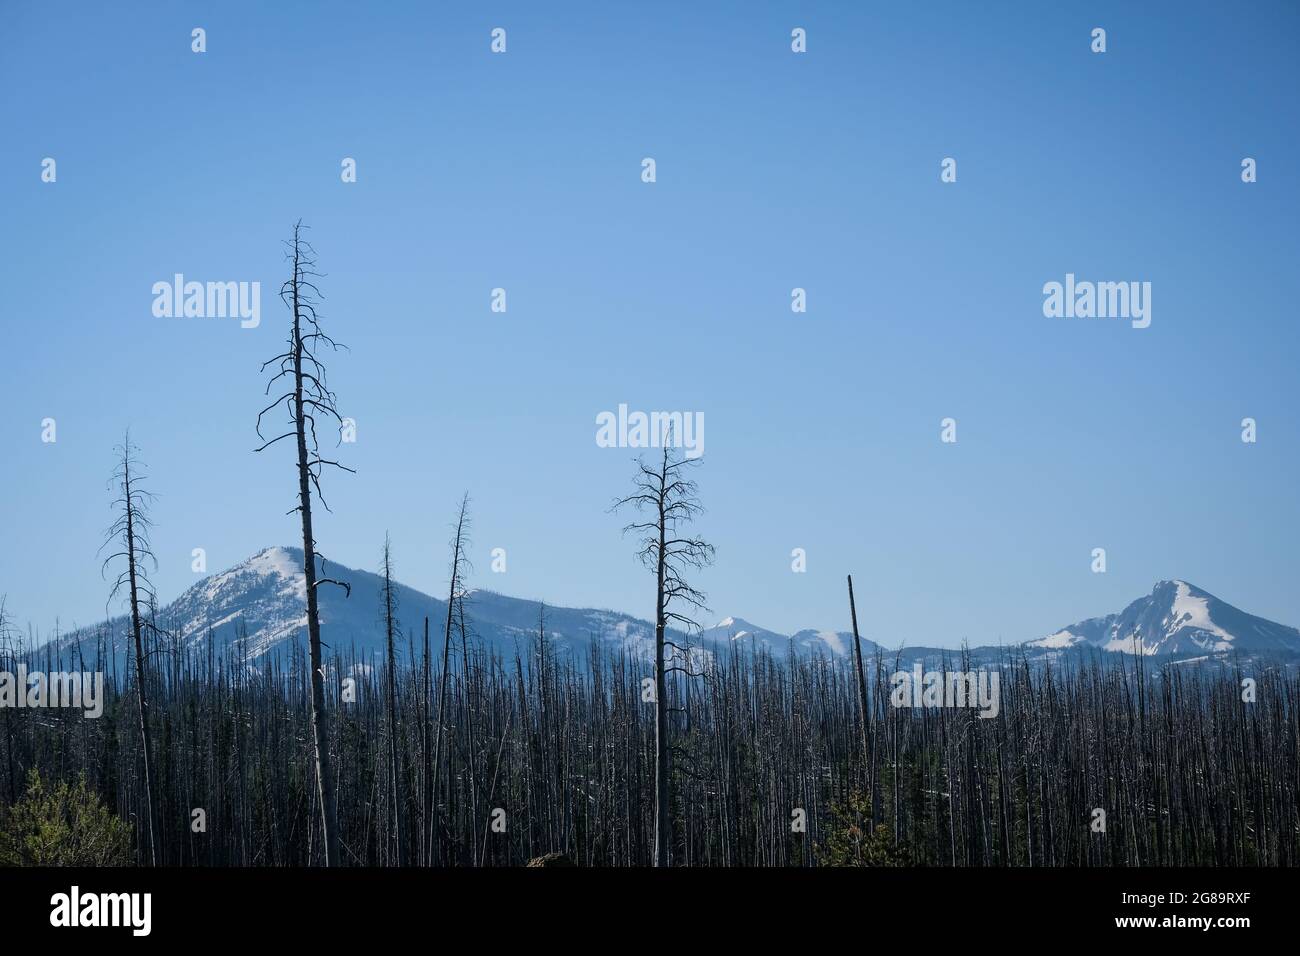 Reforestation by lodgepole pines after forest fires in Yellowstone National Park, Wyoming, USA. Stock Photo